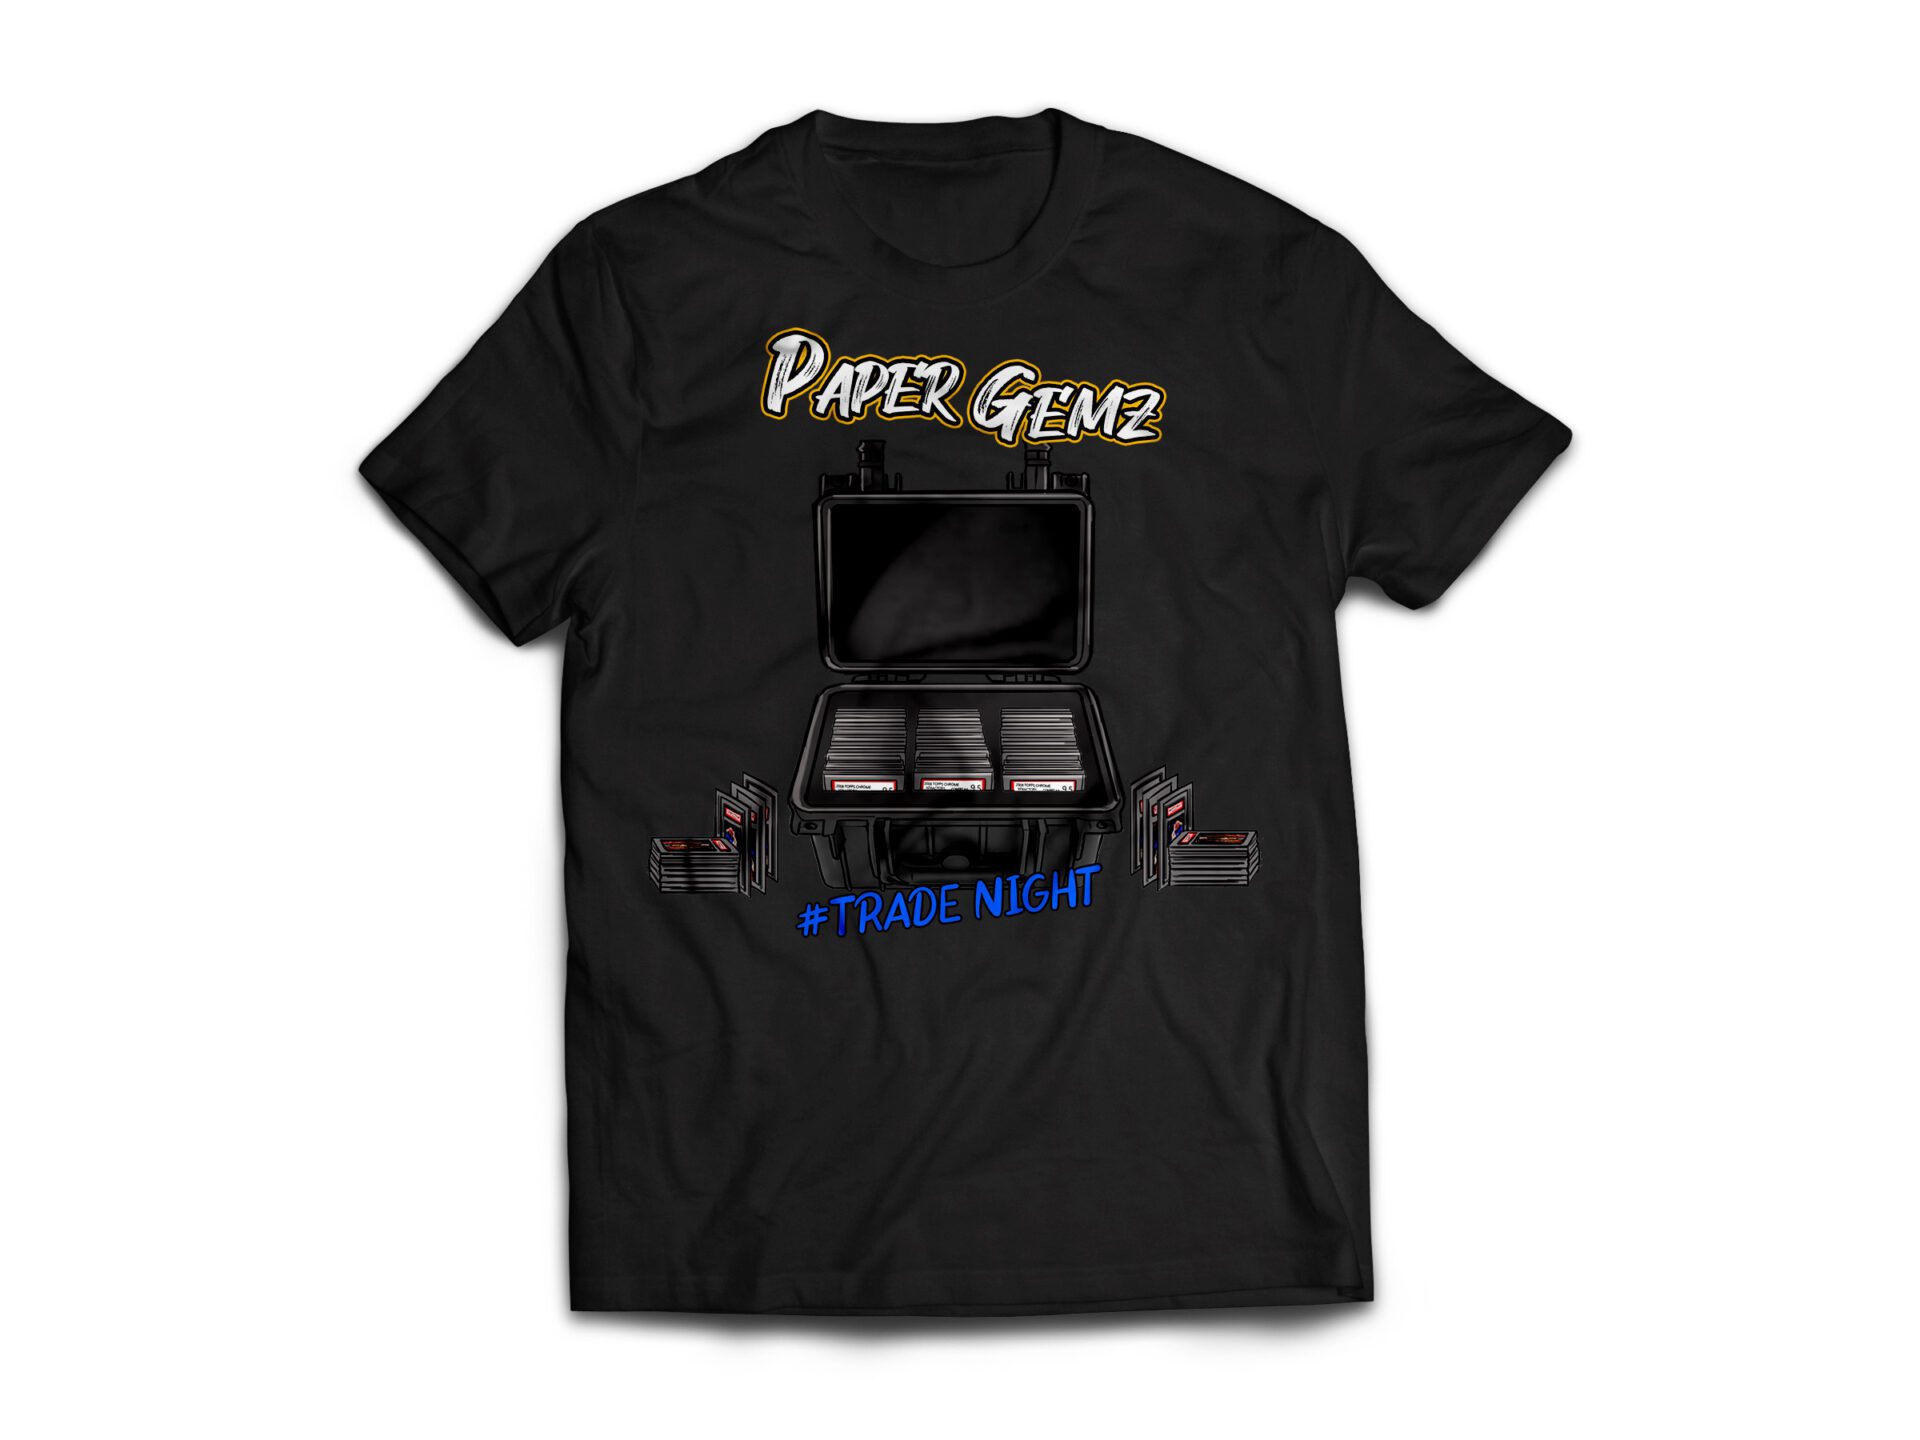 A black T-shirt featuring a box of trading cards